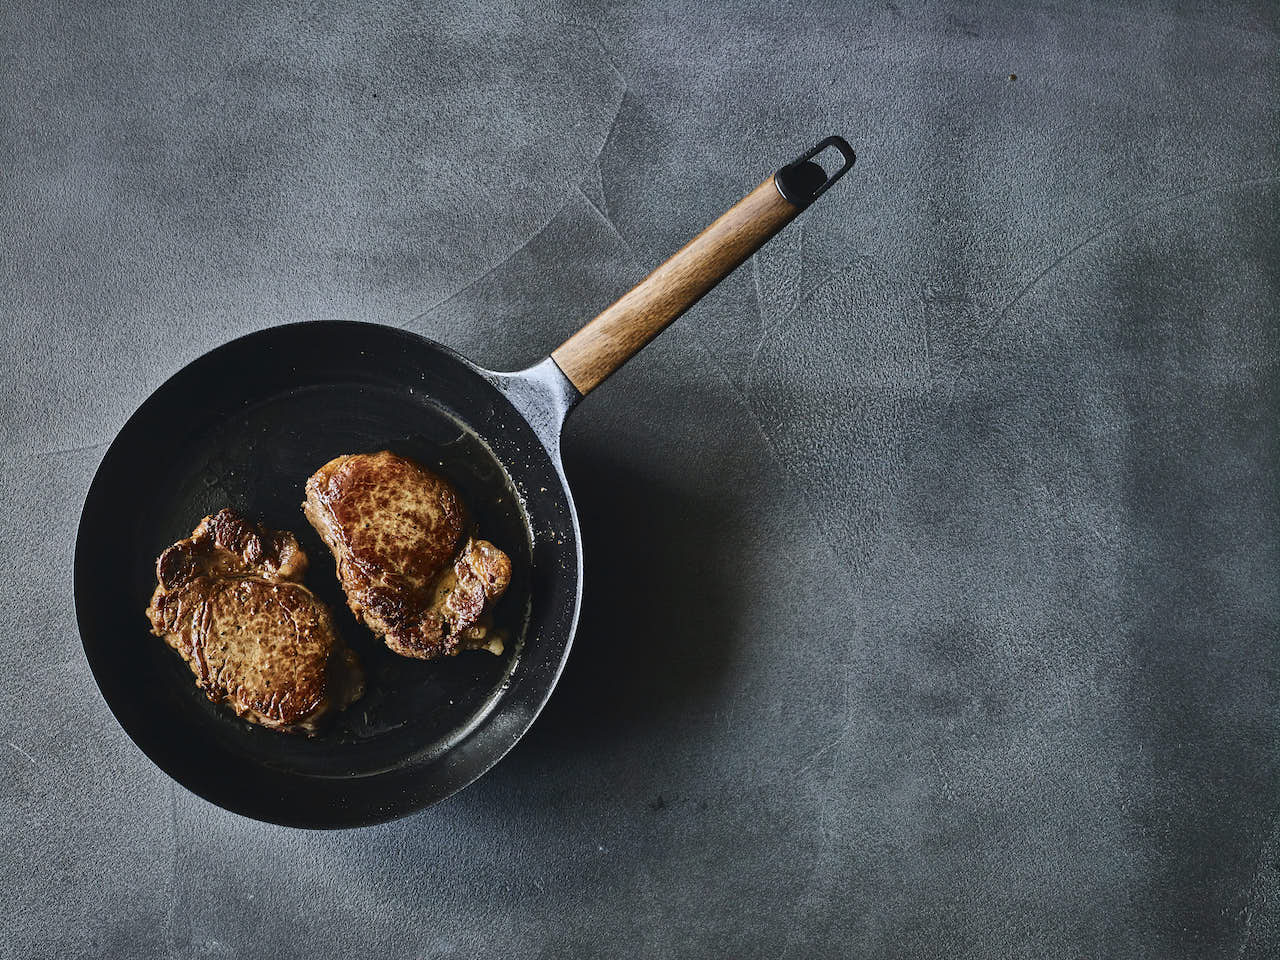 Vermicular's Japanese Heritage Has Transformed Cast Iron Cookware